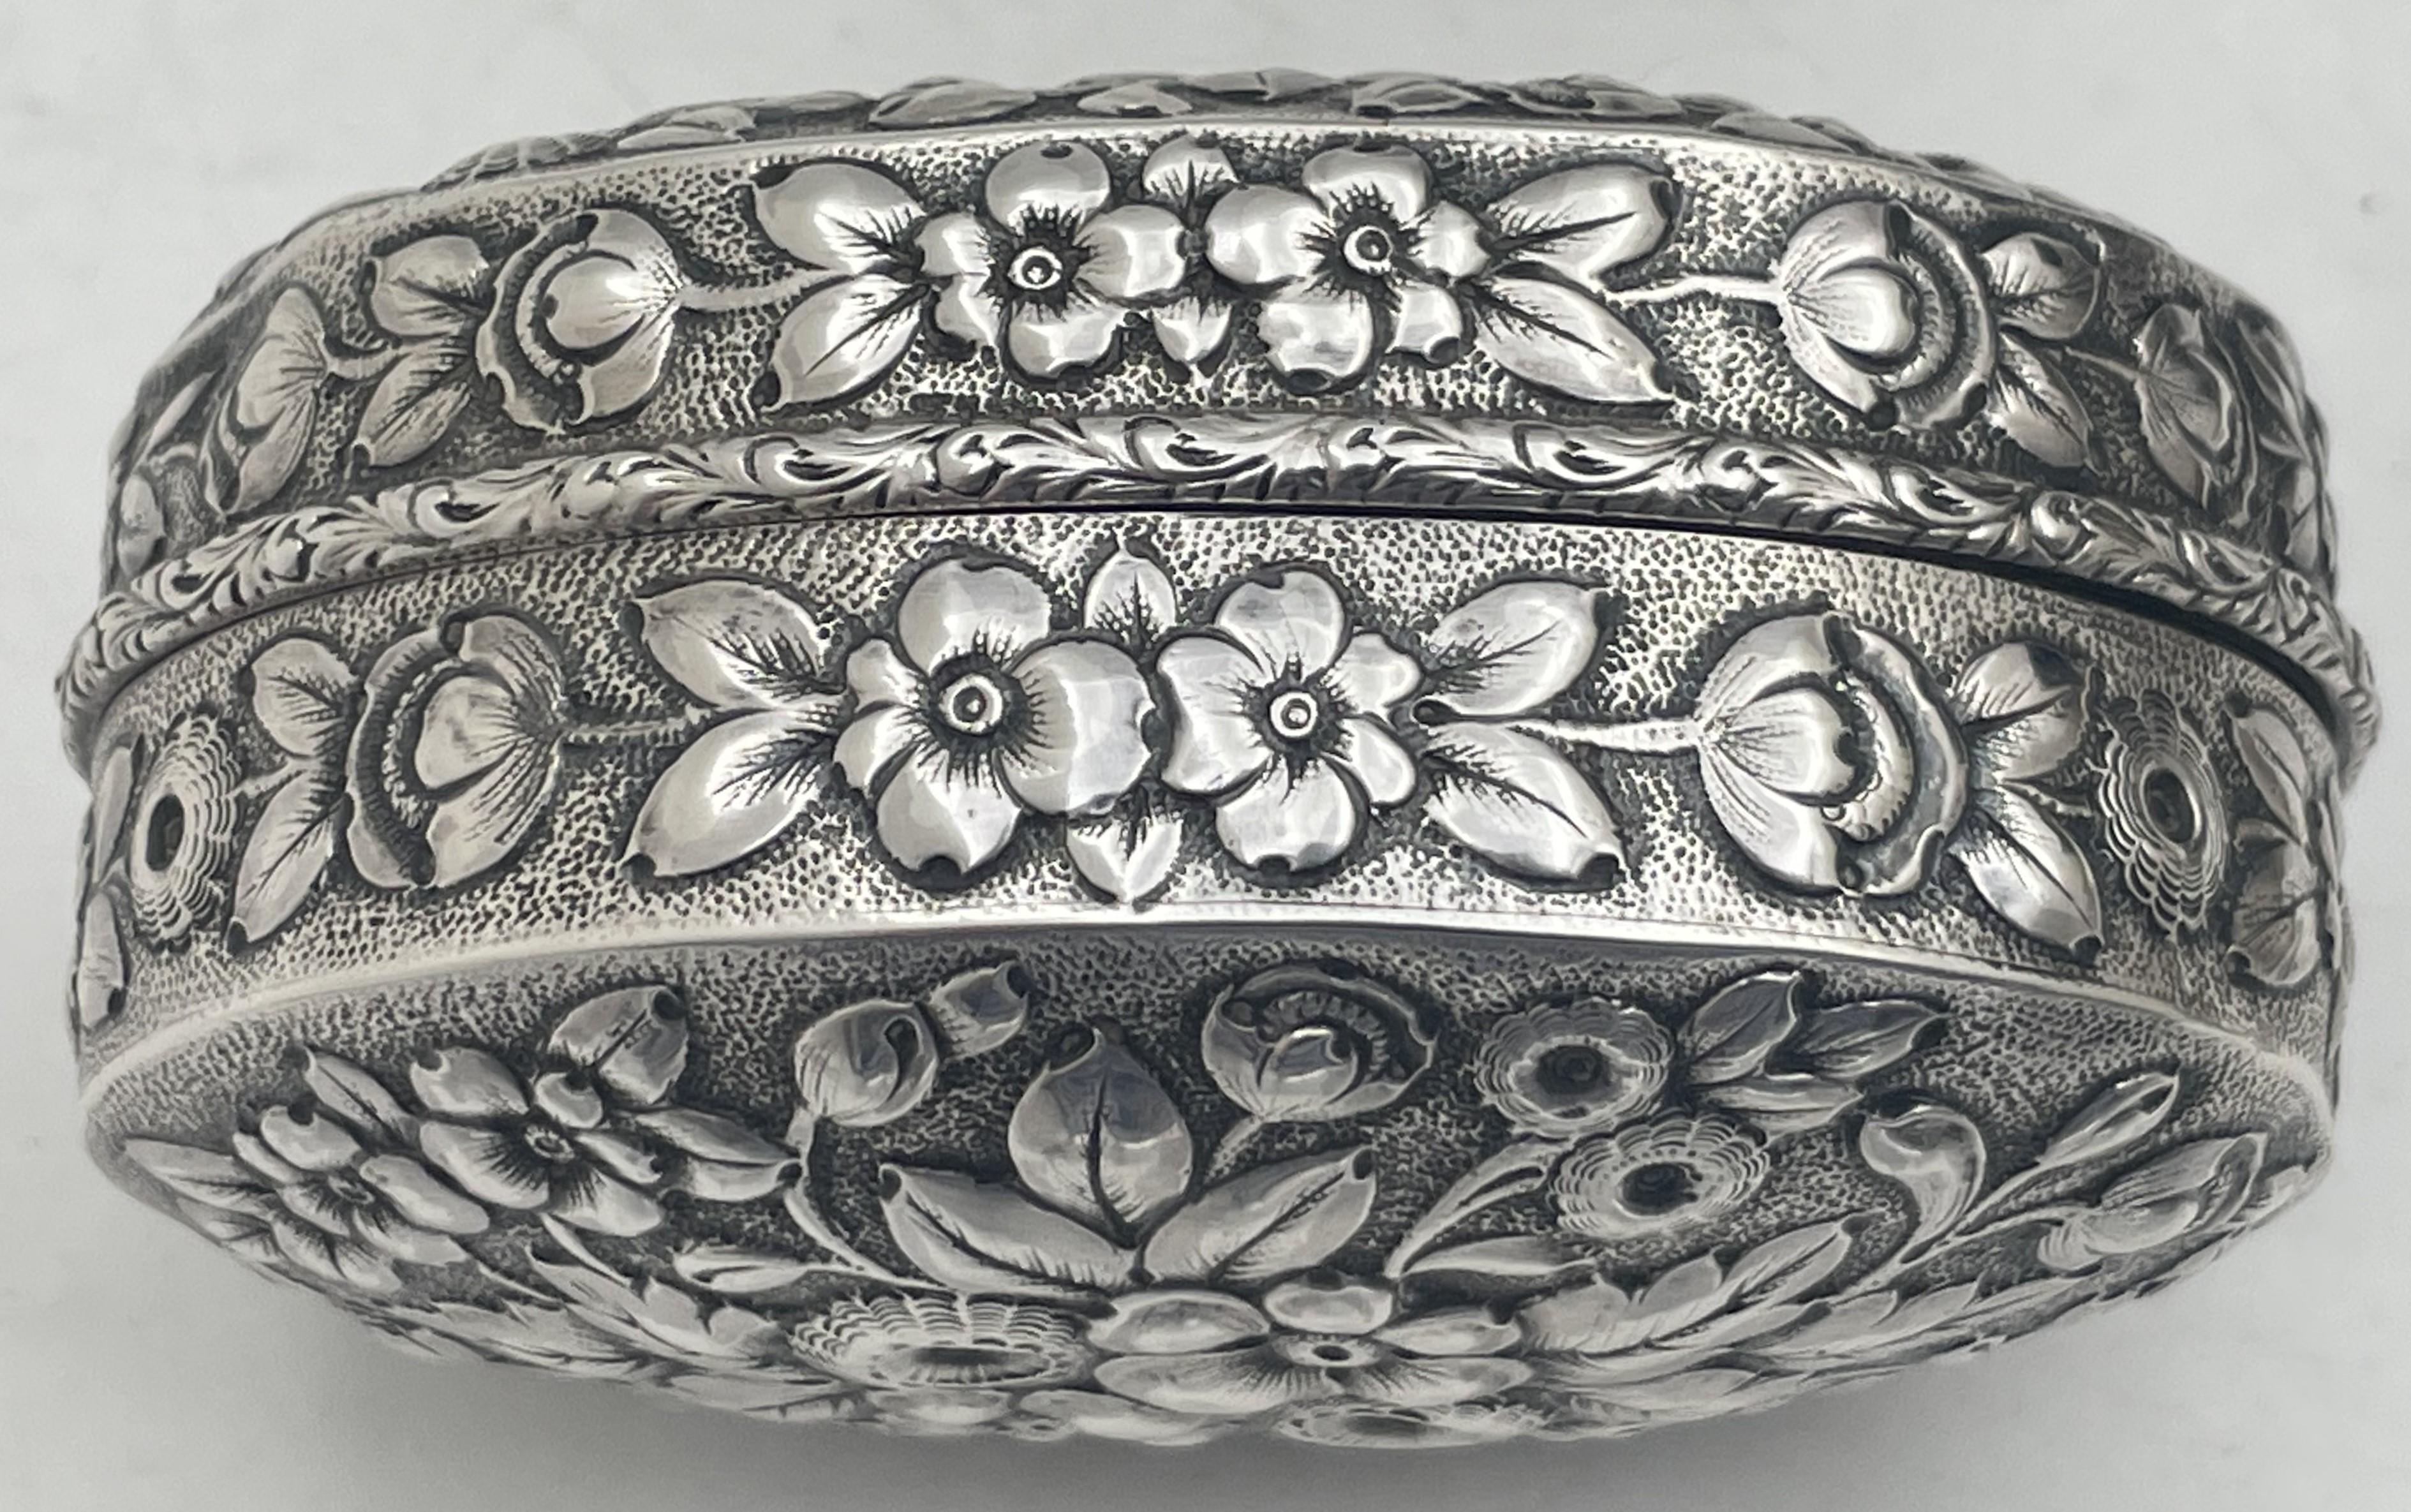 Repoussé Dominick & Haff / Bailey, Banks & Biddle Sterling Silver Oval Repousse Snuff Box For Sale